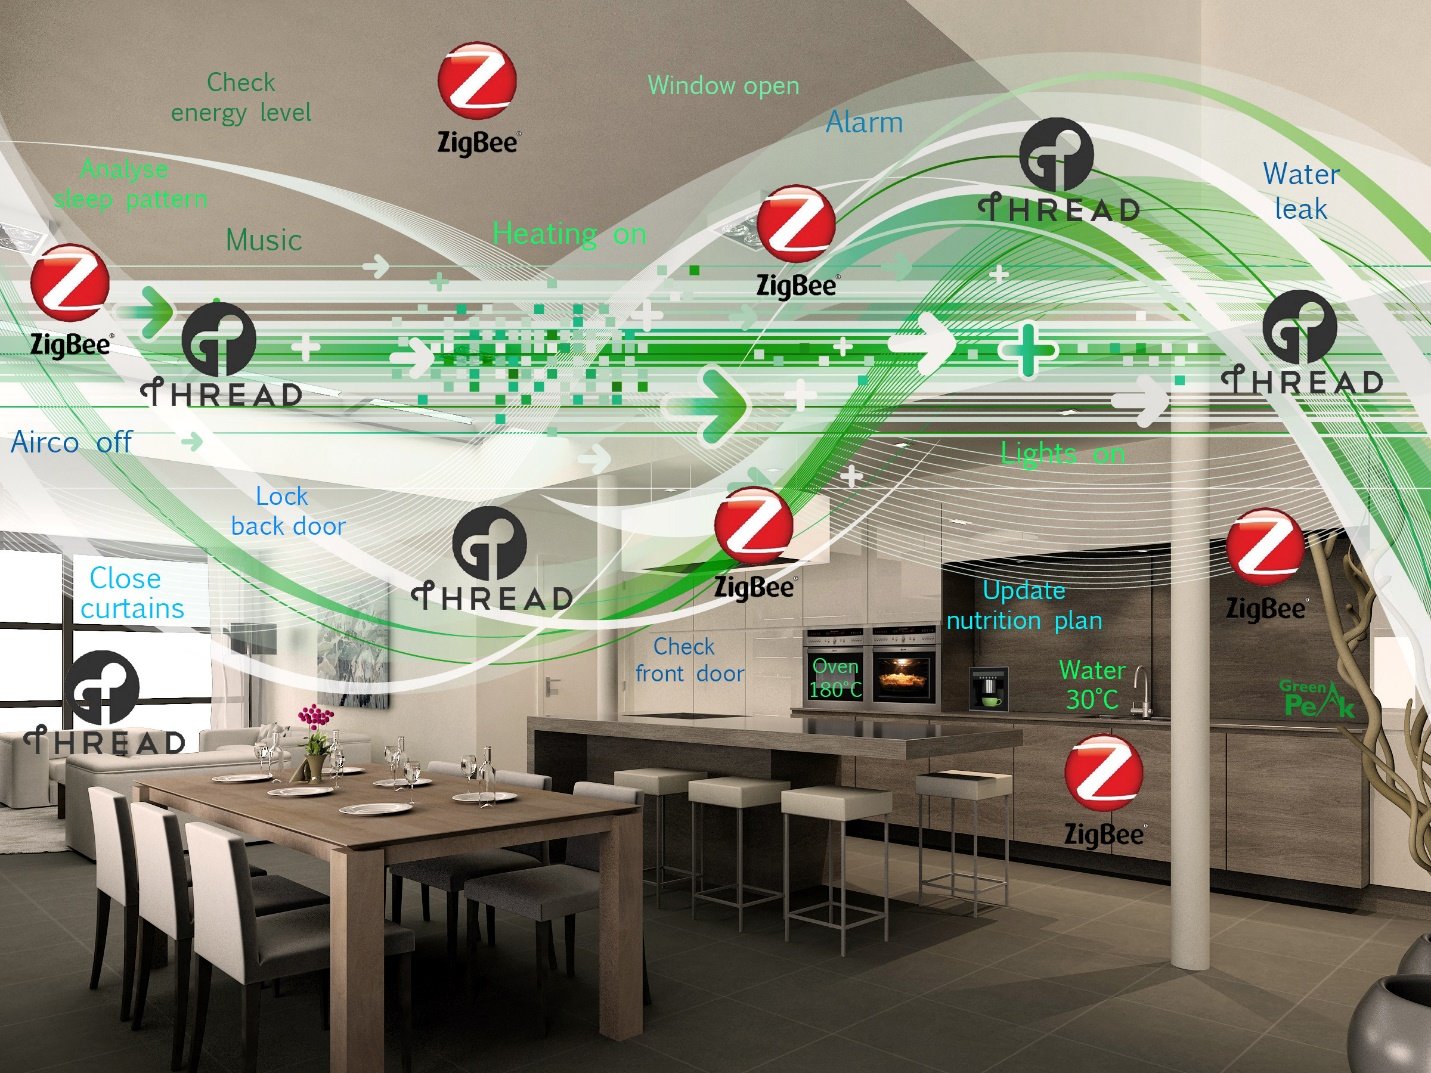 Green Peak Technologies’ GP712 chipset provides a single radio multi-protocol and multi-channel solution for ZigBee and Thread networks (Source:  Green Peak Technologies).